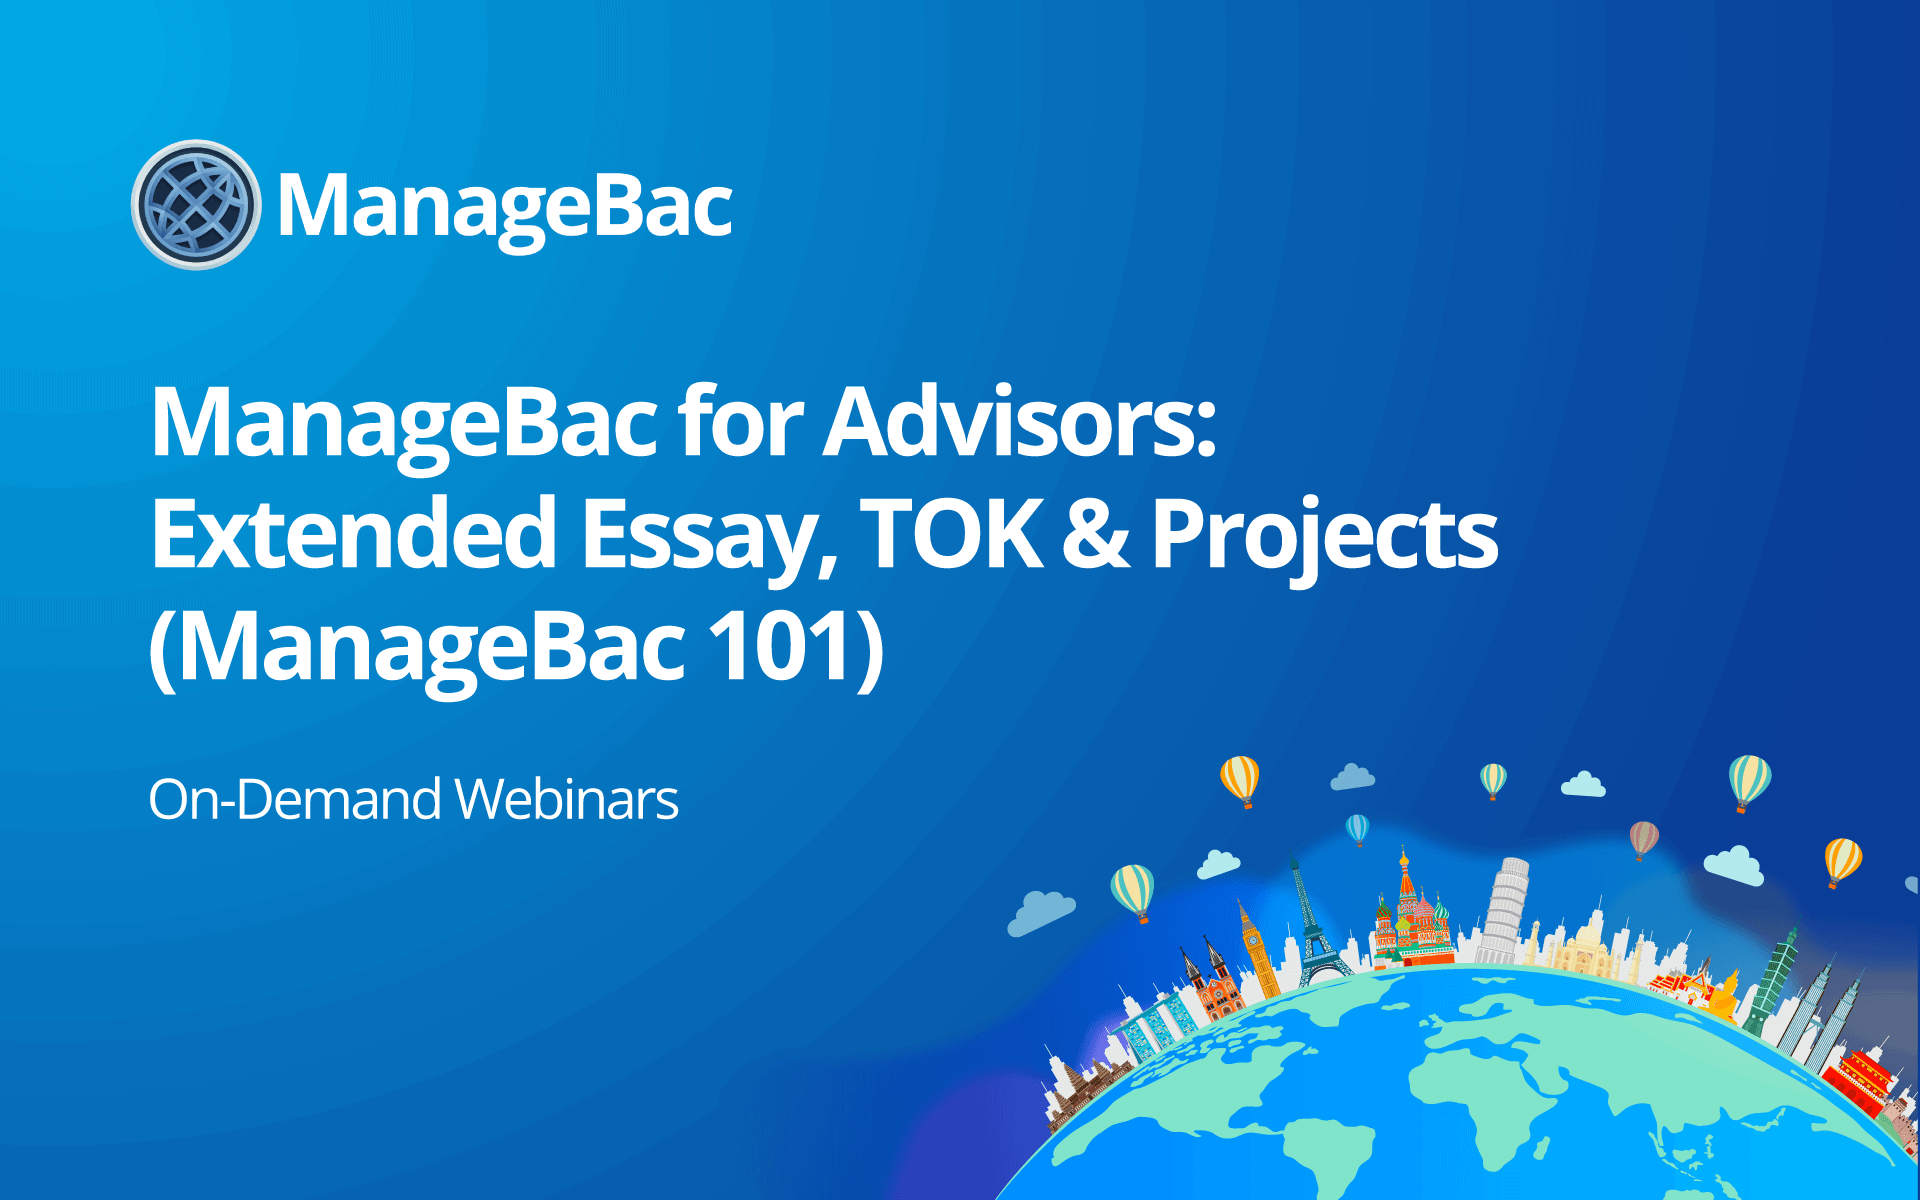 ManageBac for Advisors: Extended Essay, TOK & Projects (ManageBac 101)